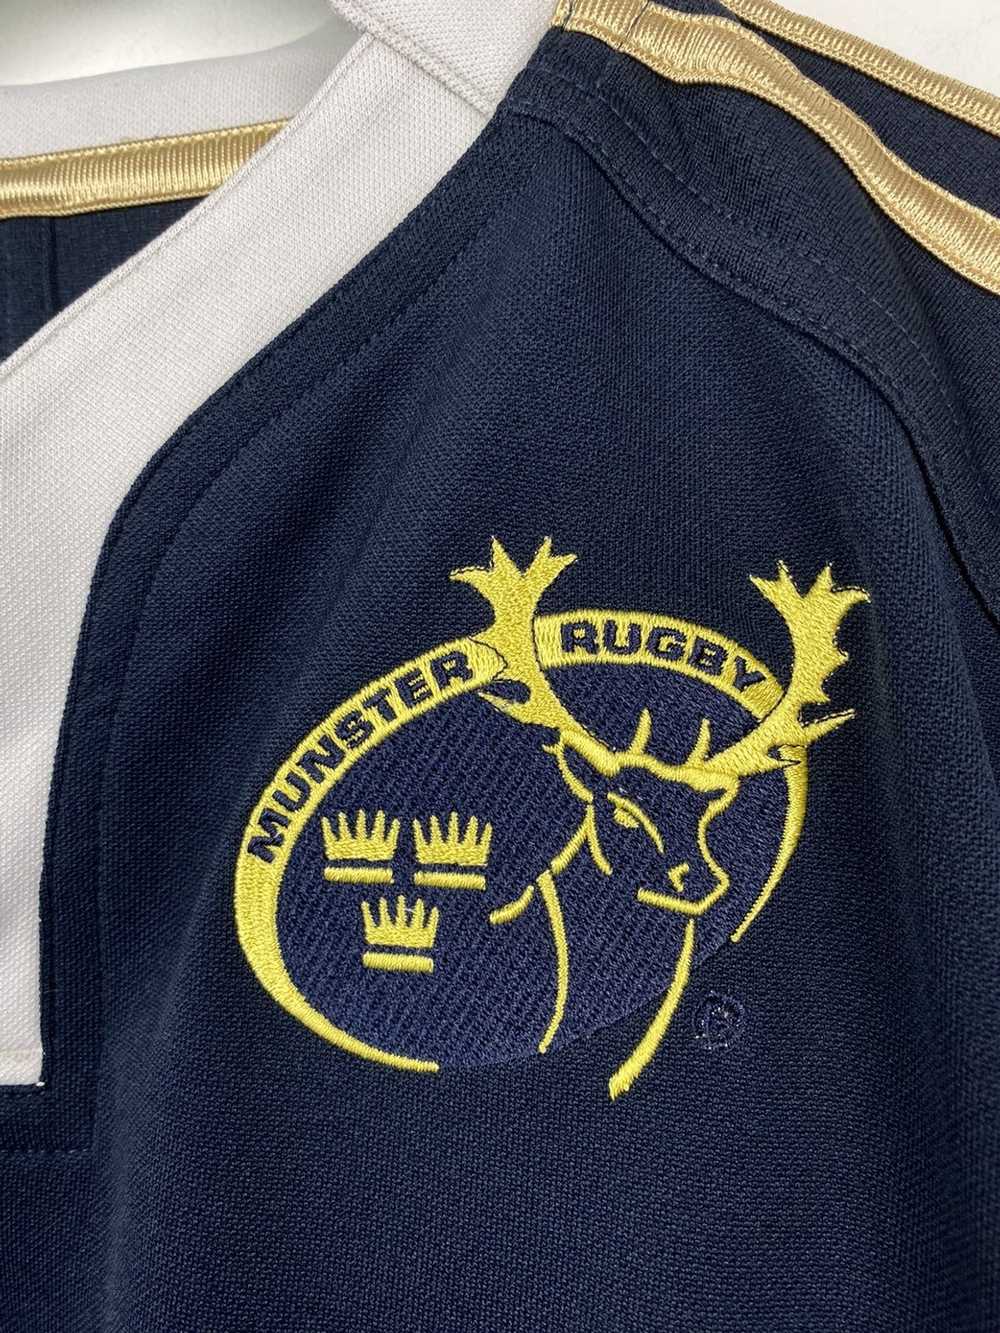 Adidas × England Rugby League × Vintage Munster R… - image 3